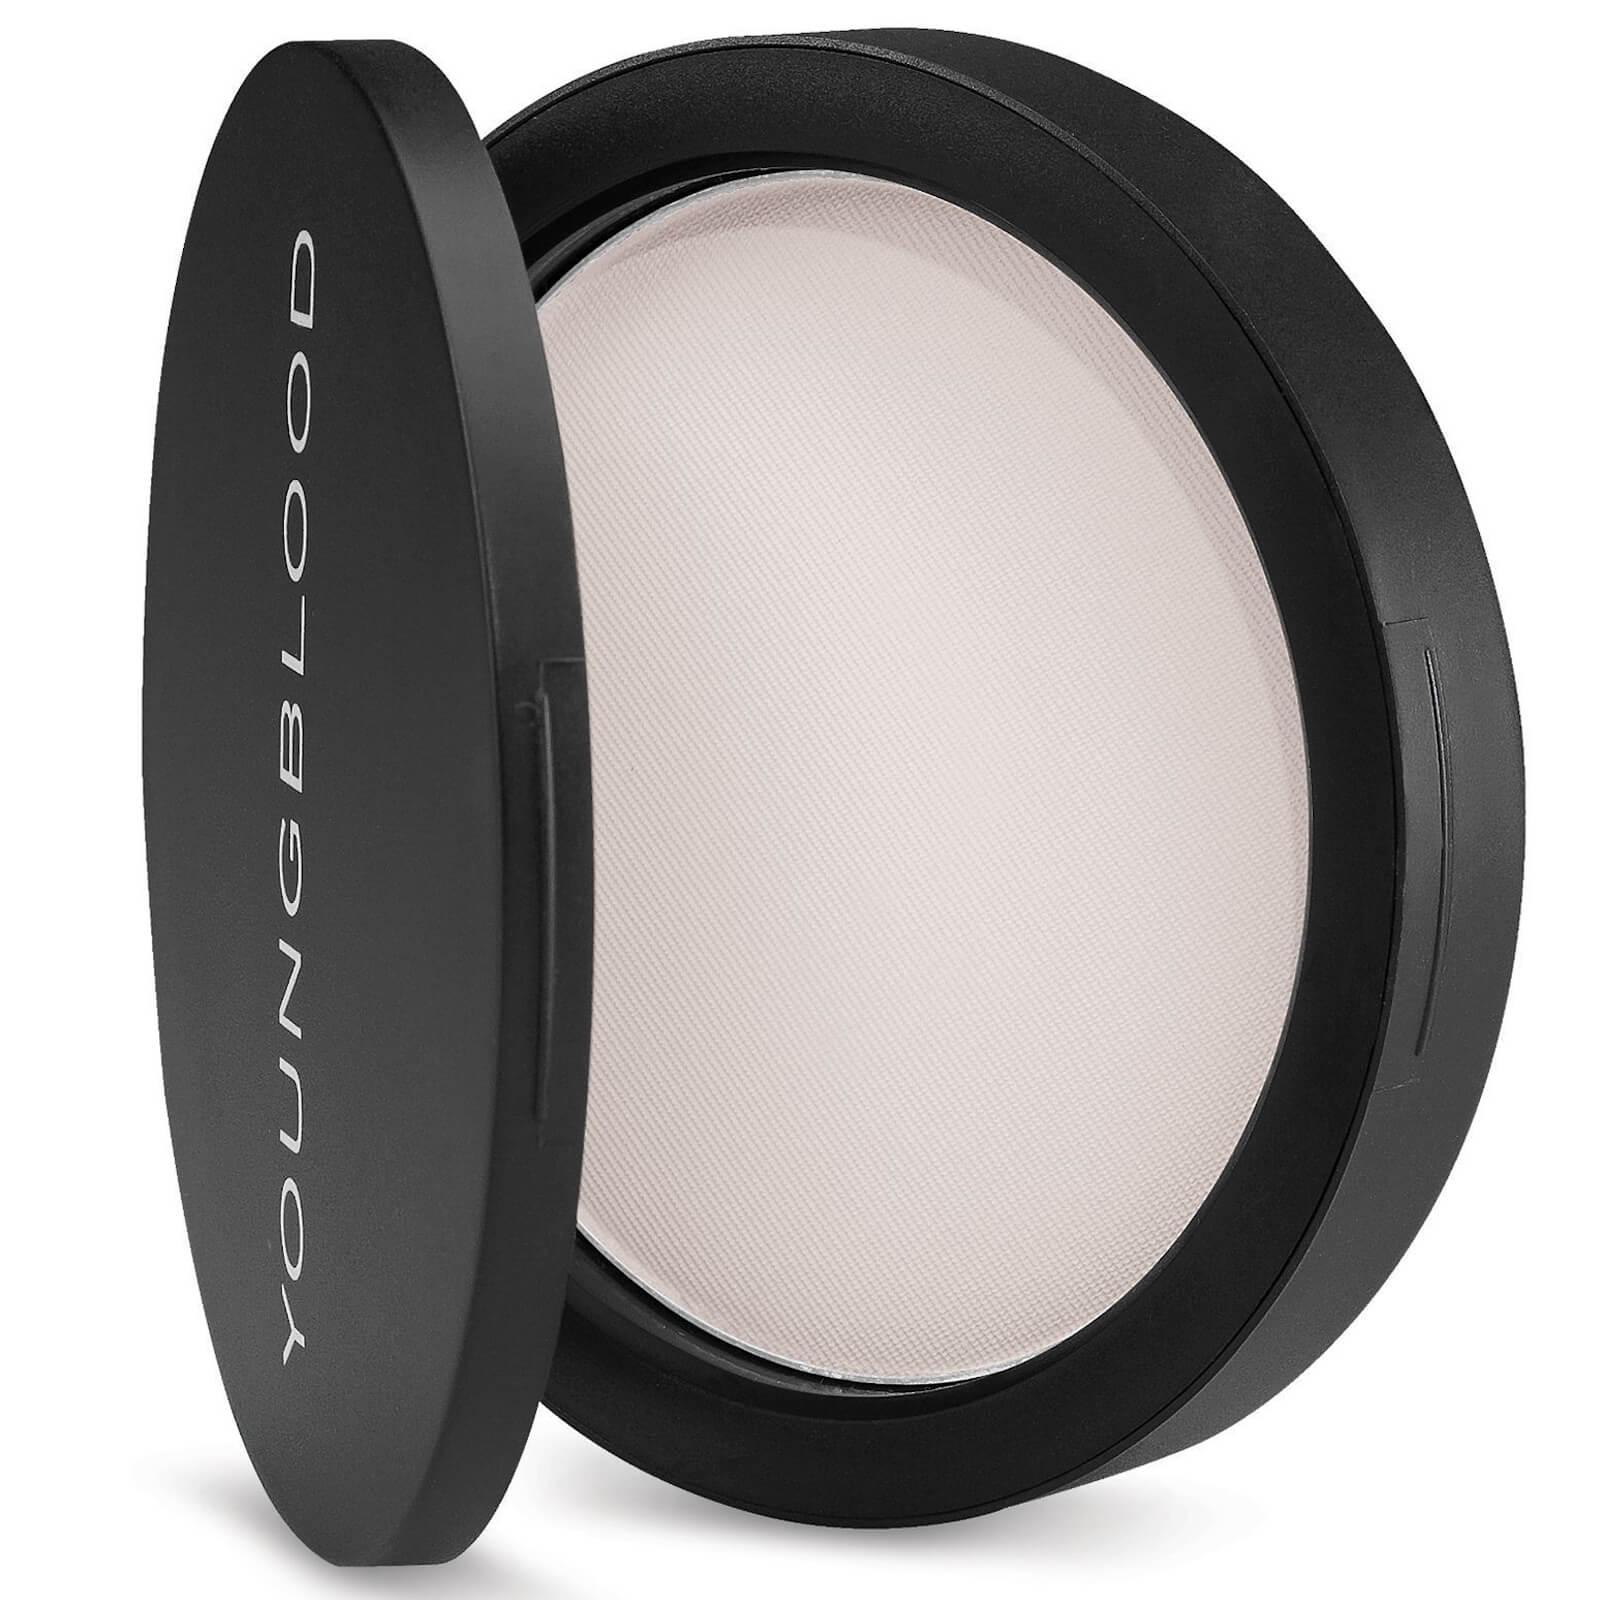 Youngblood Mineral Rice Pressed Setting Powder 10g (Various Shades) - Light